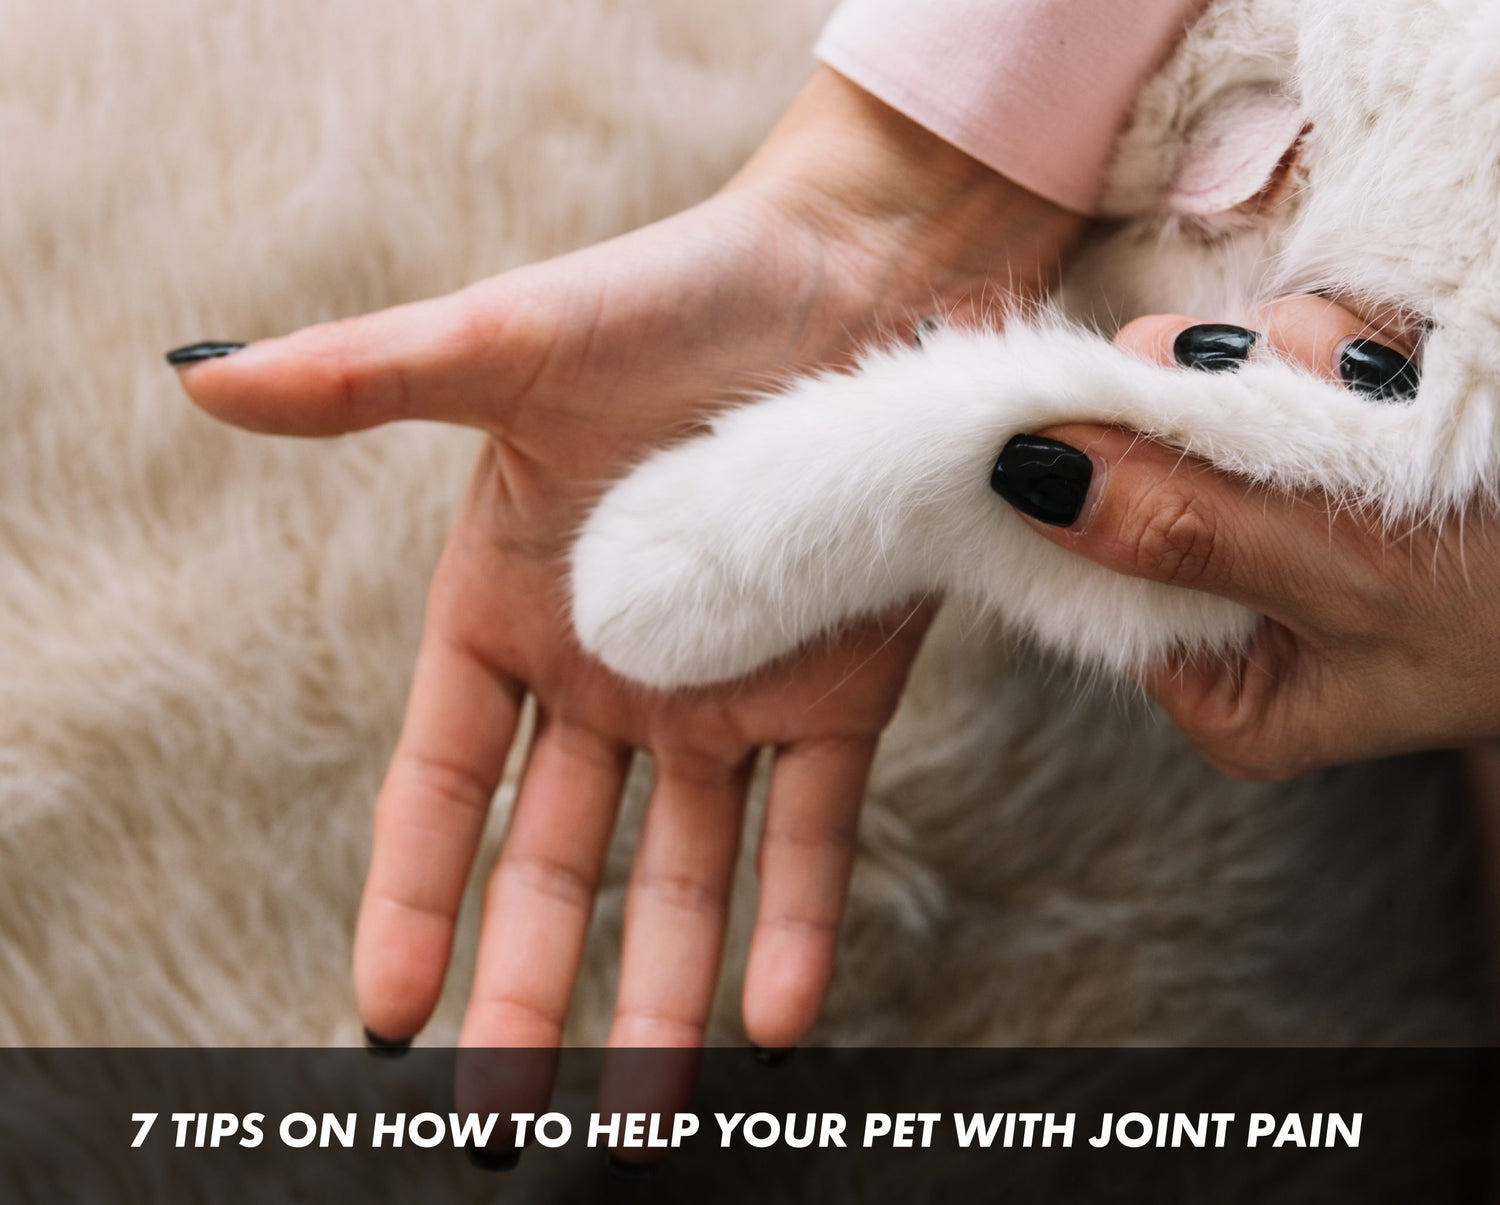 7 Tips on How to Help your Pet with Joint Pain